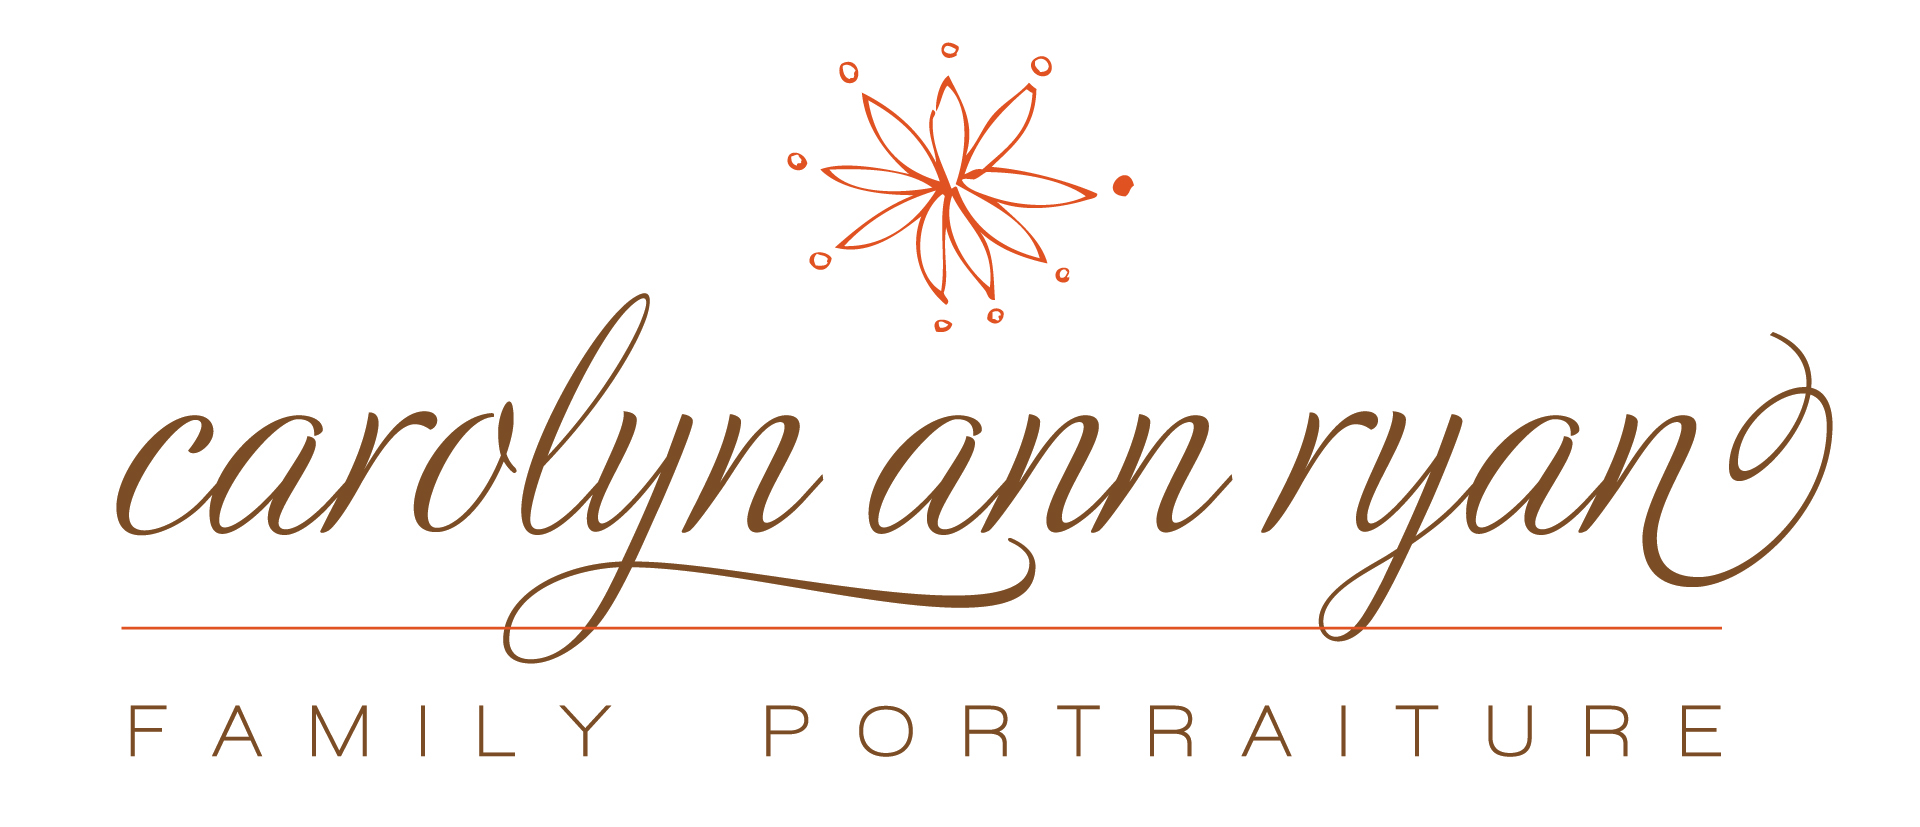 Charlotte Photographer, Carolyn Ann Ryan, specializing in Family Portraits